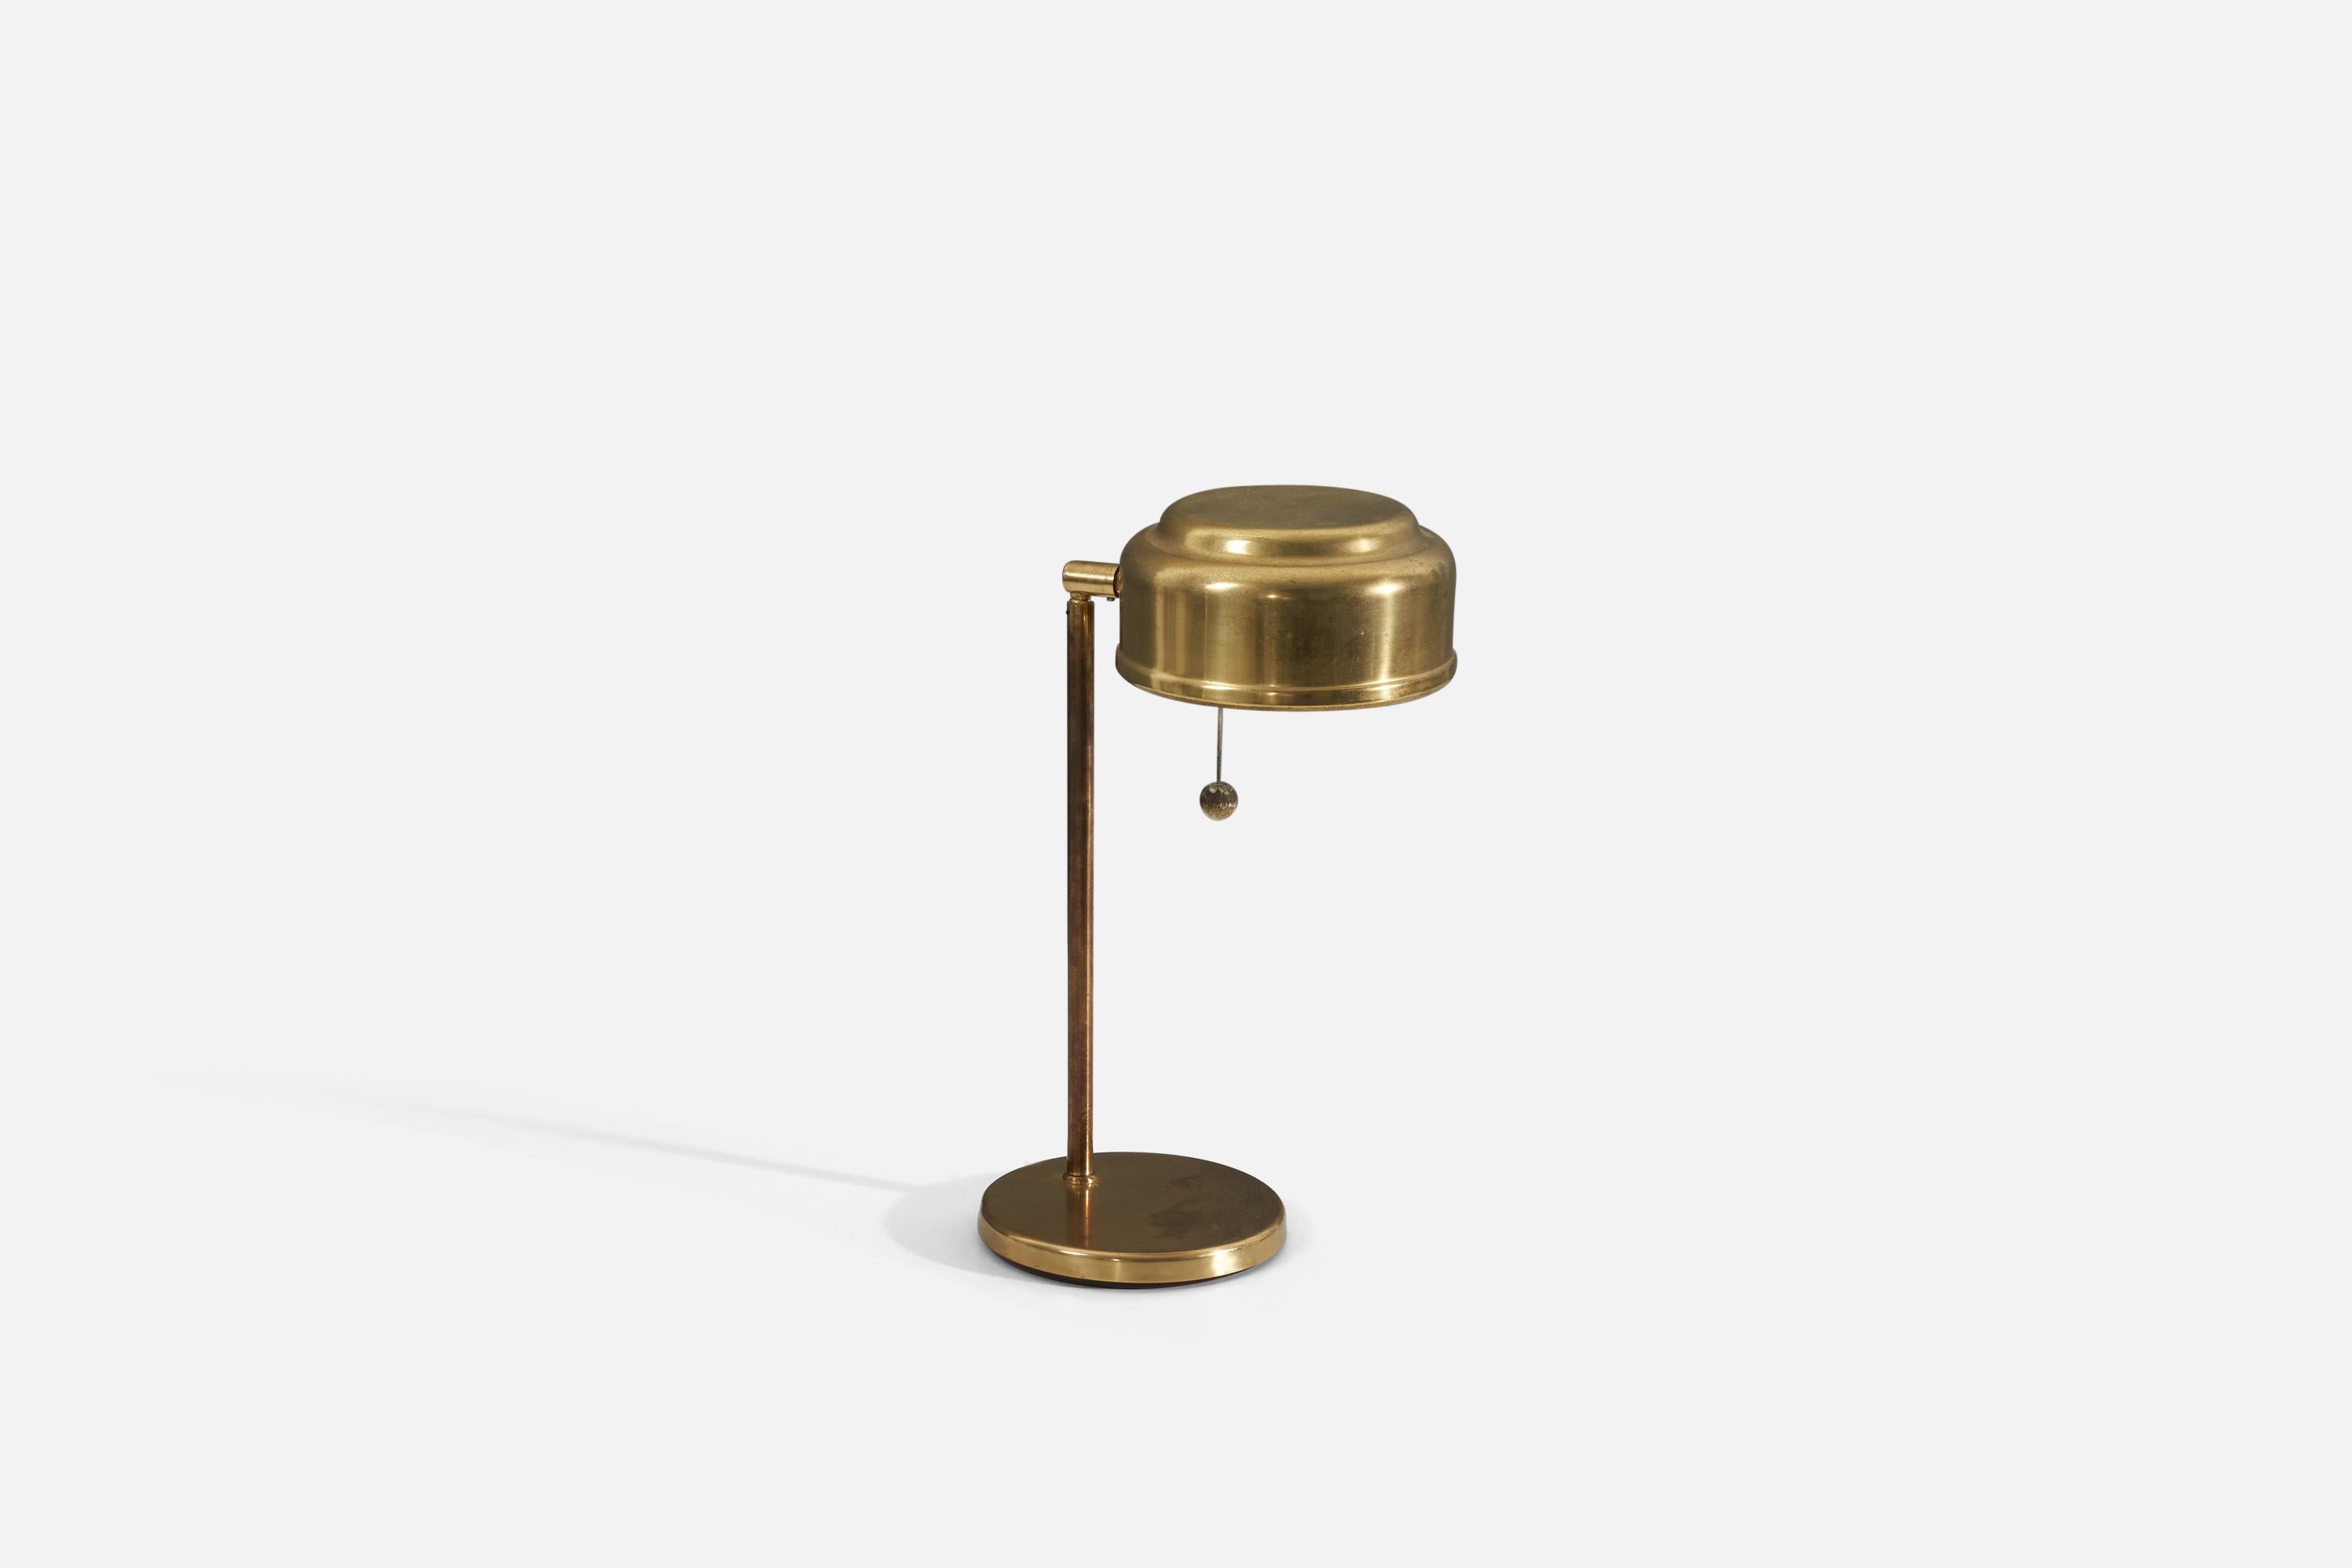 An adjustable brass table / desk lamp designed and produced in Sweden, 1960s.